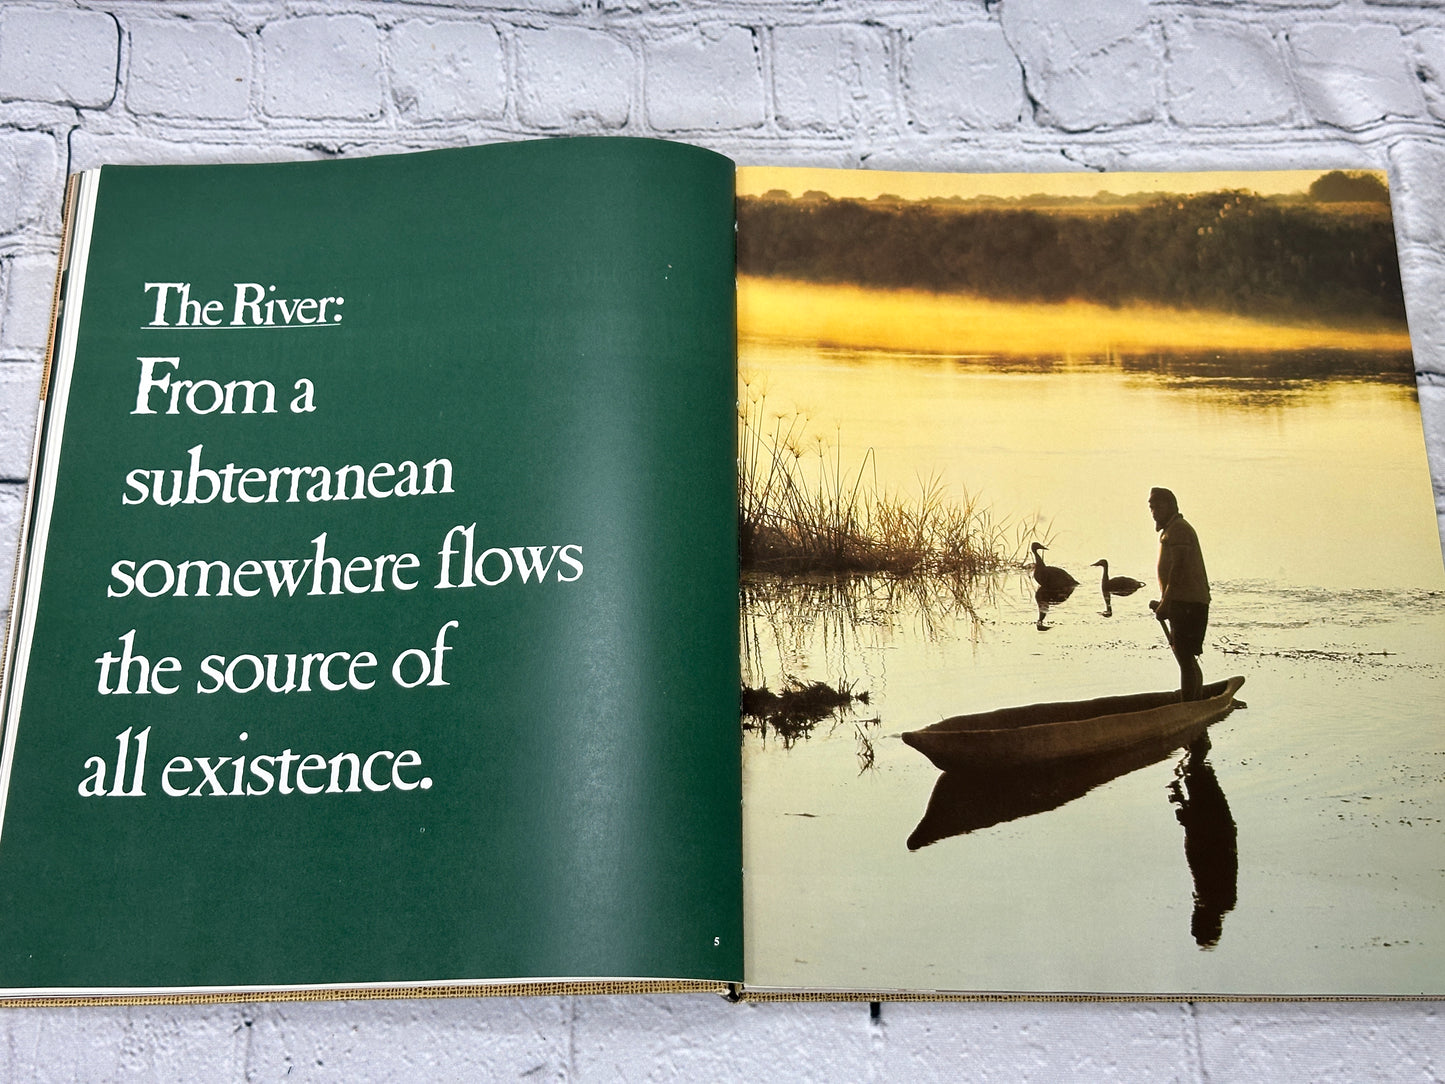 Okavango Sea of Land Land of Water By Johnson & Bannister [1st Ed · 1977]